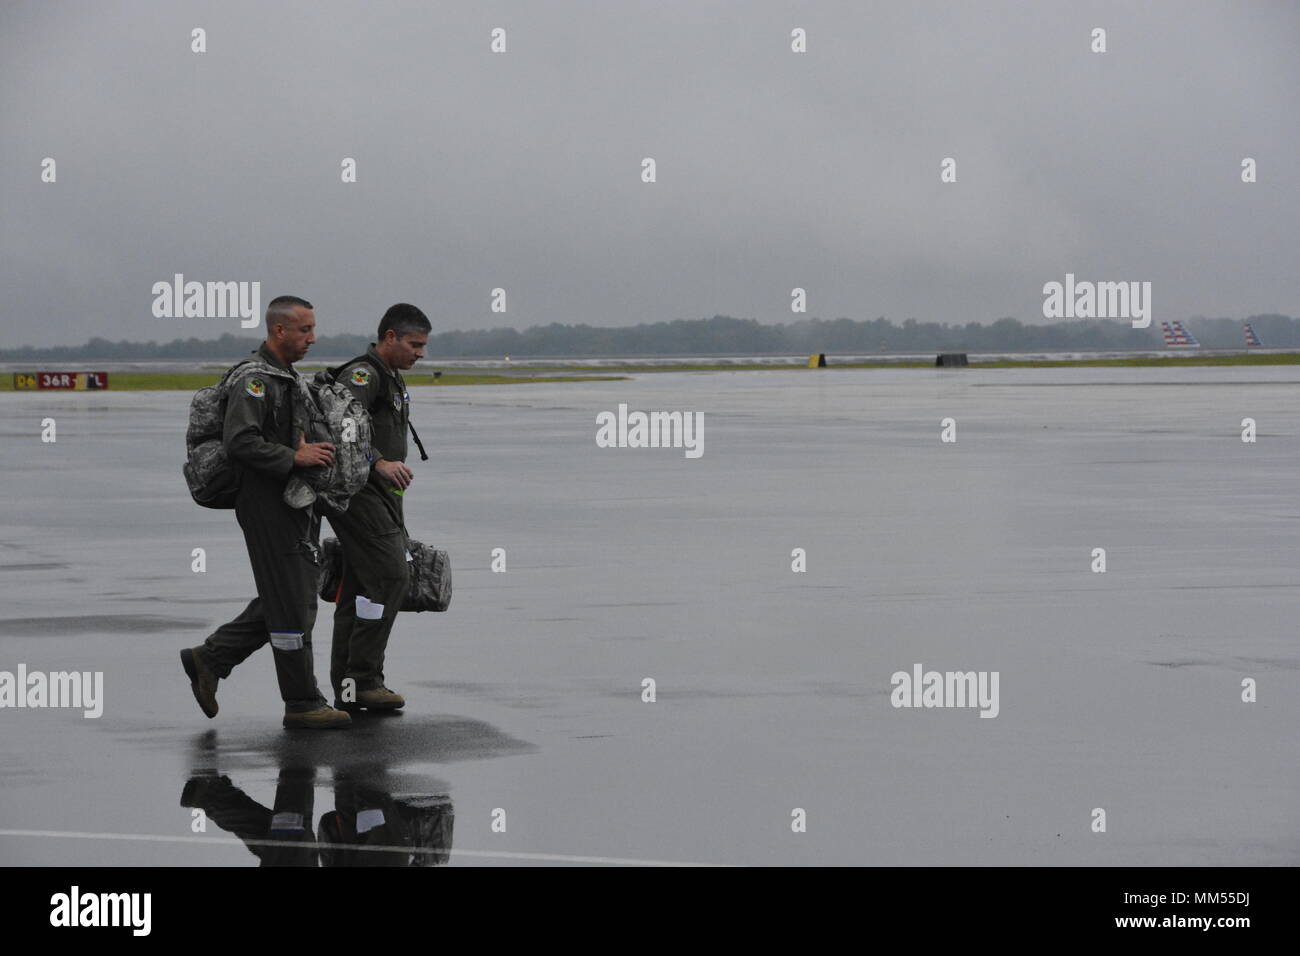 Two members of the 156th Aeromedical Evacuation Squadron of the North Carolina Air National Guard walk towards a C-130 for departure to Key West Florida to aid in medical evacuations prior to the arrival of Hurricane Irma, while at the North Carolina Air National Guard Base, Charlotte Douglass International Airport, Sept. 6, 2017. The guardsman assisted with the transfer of eleven patients from the Lower Keys Medical Center in Key West Florida, to the Gadsden Alabama Regional Medical Center. Stock Photo